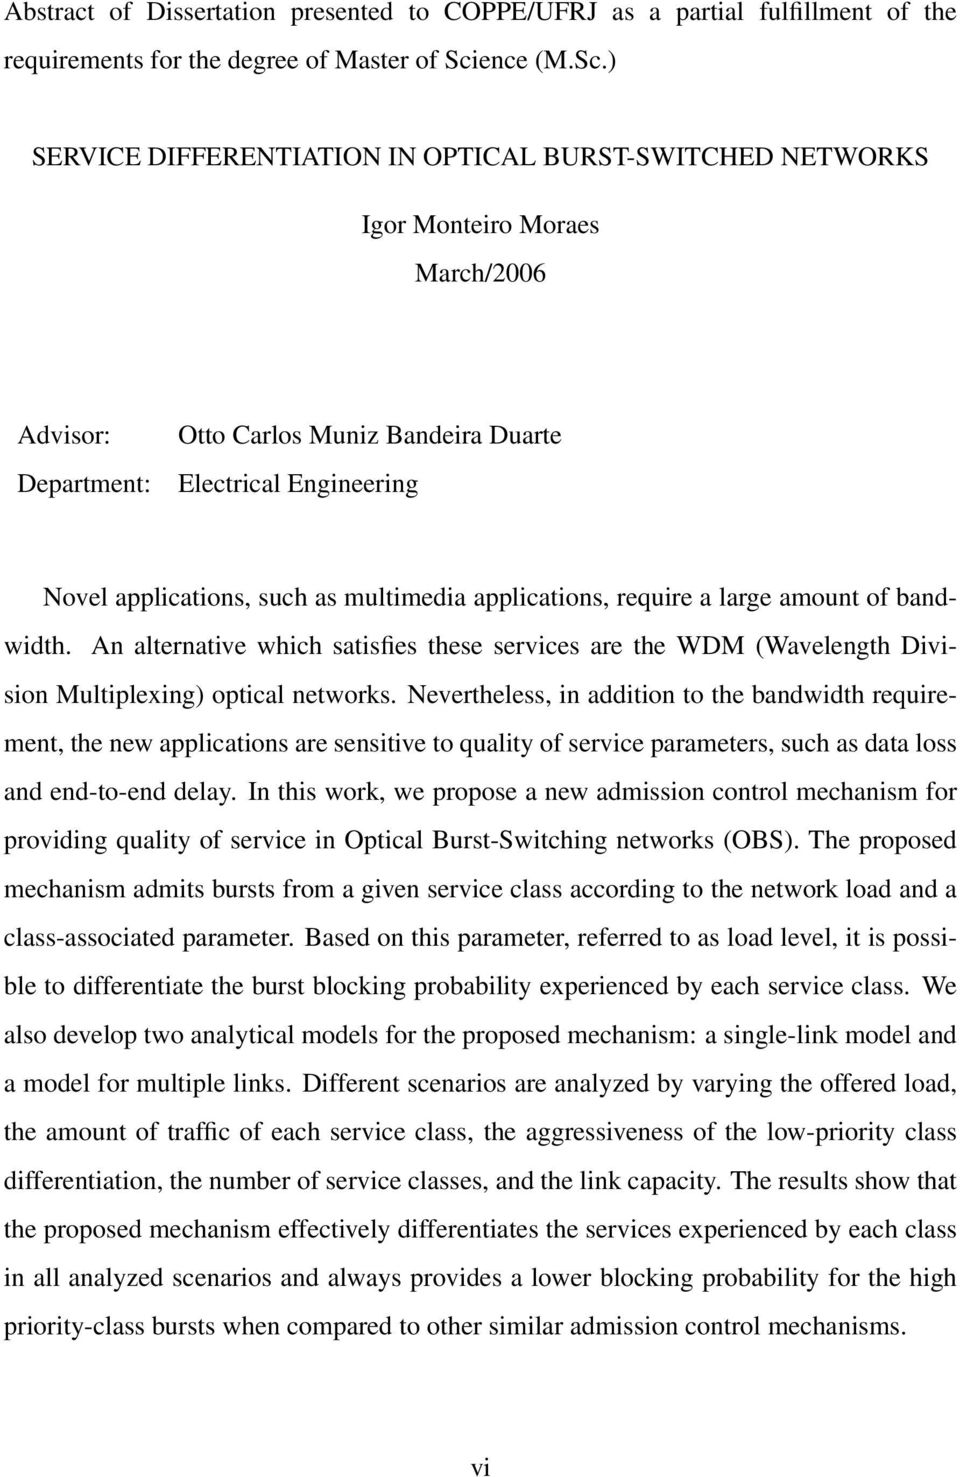 ) SERVICE DIFFERENTIATION IN OPTICAL BURST-SWITCHED NETWORKS Igor Monteiro Moraes March/2006 Advisor: Department: Otto Carlos Muniz Bandeira Duarte Electrical Engineering Novel applications, such as